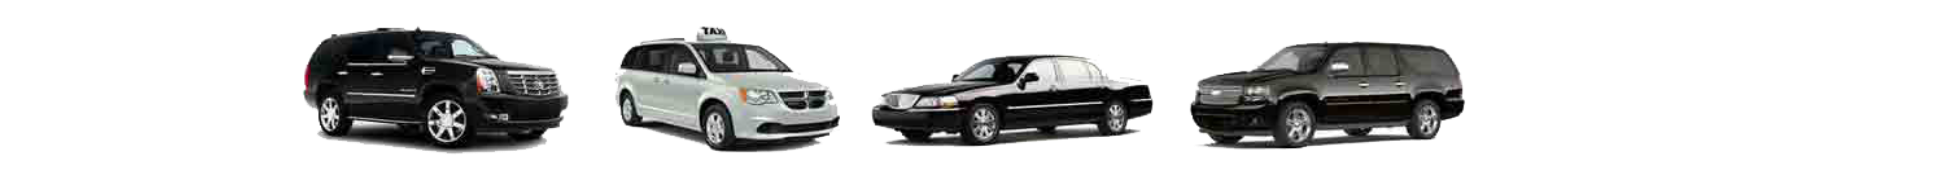 Mounds View Airport Cab fleets